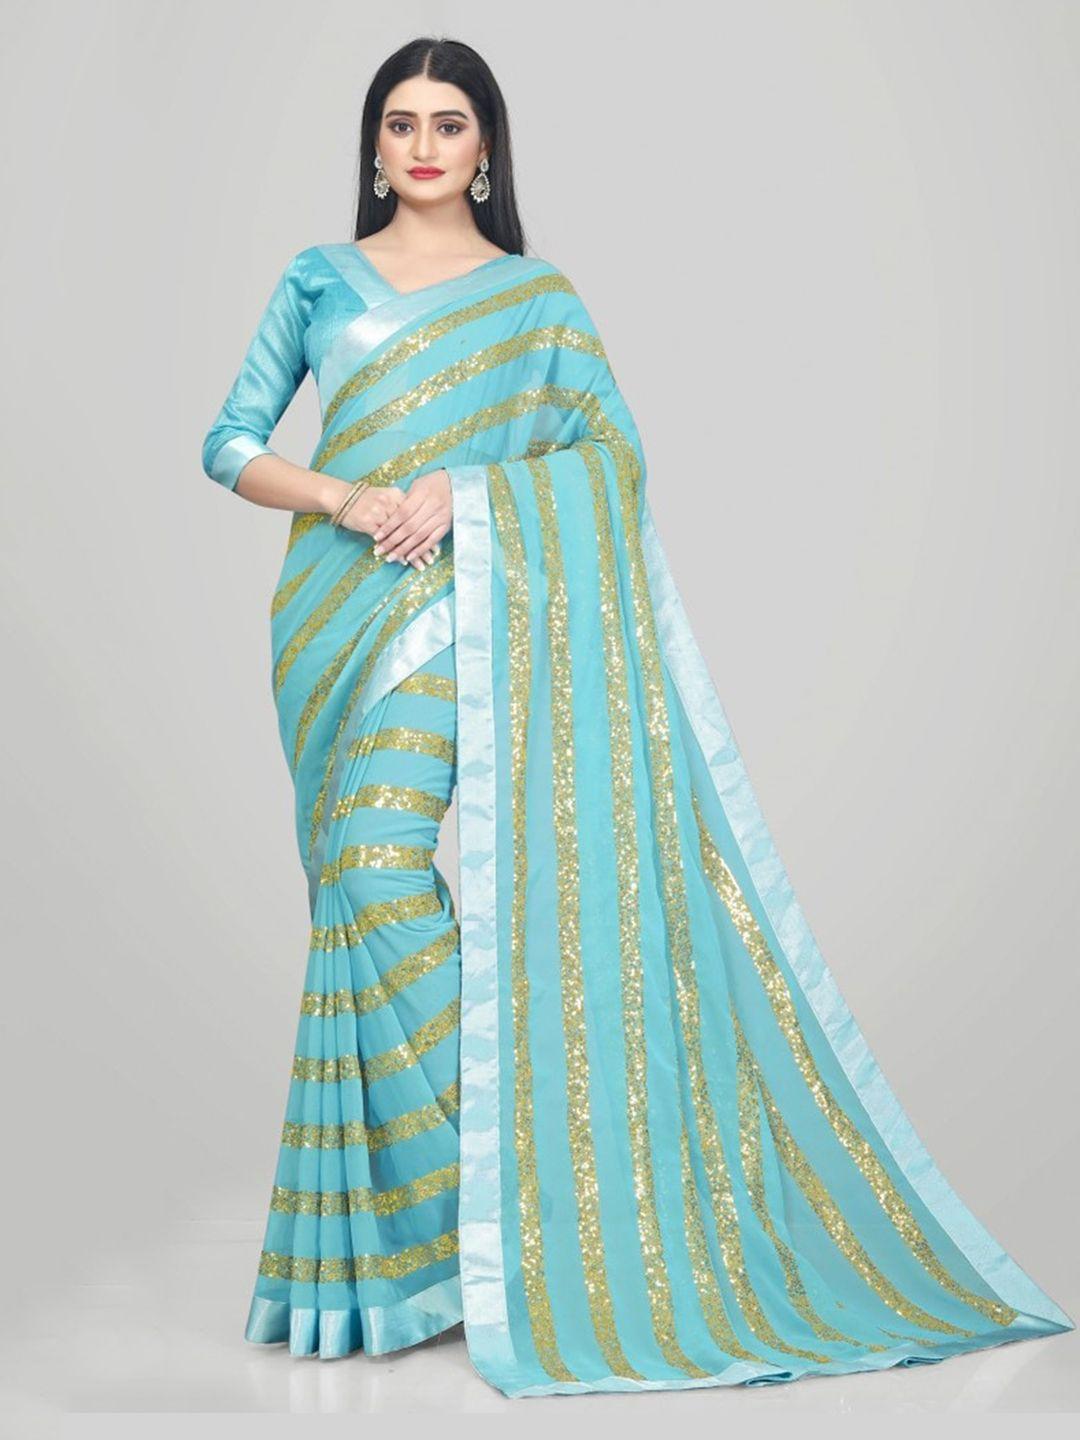 clomita turquoise blue & gold-toned embellished sequinned saree